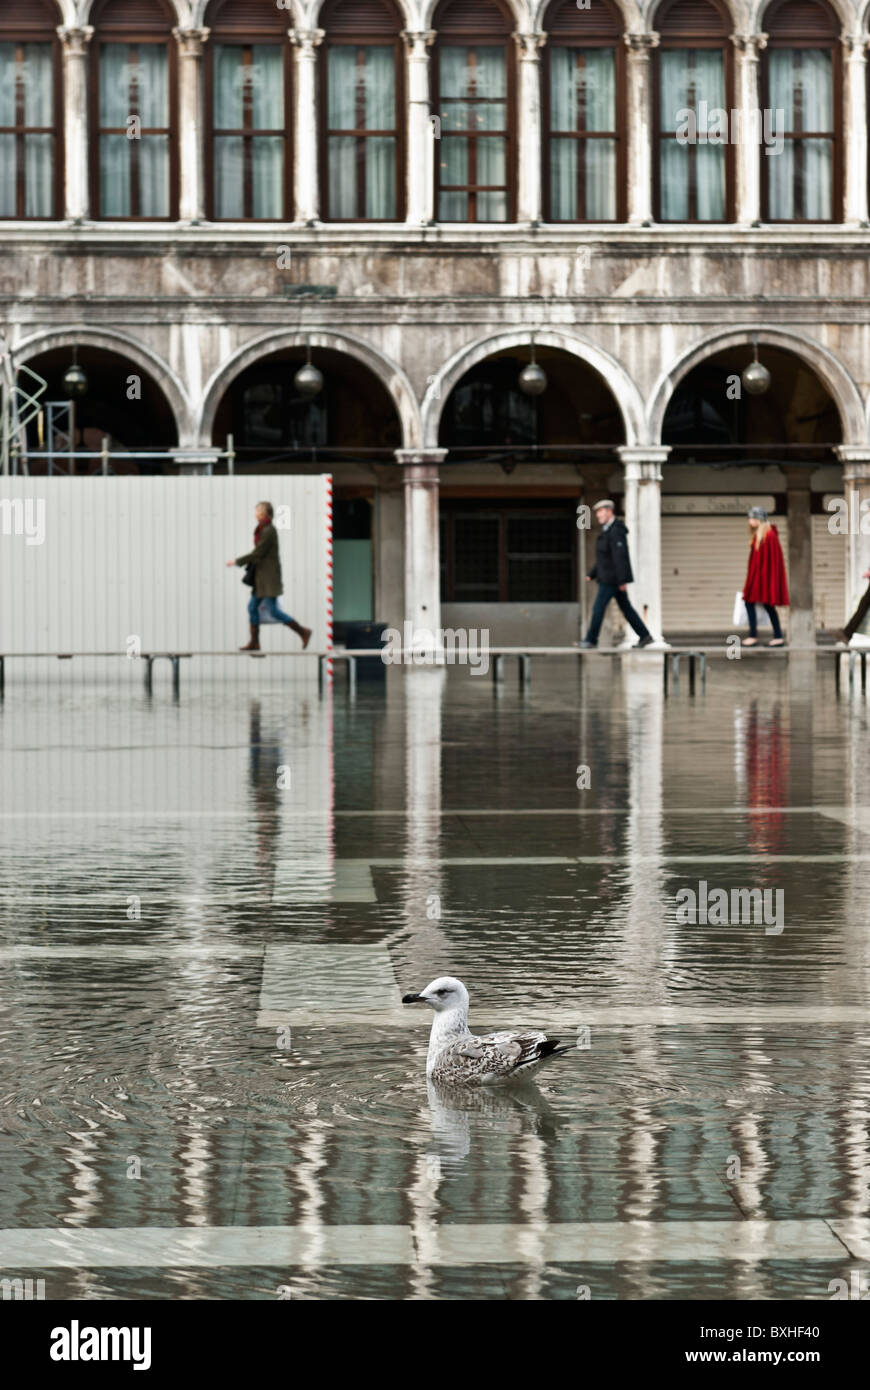 San Marco square flooded by 'Acqua alta', Venice, Italy, Europe Stock Photo